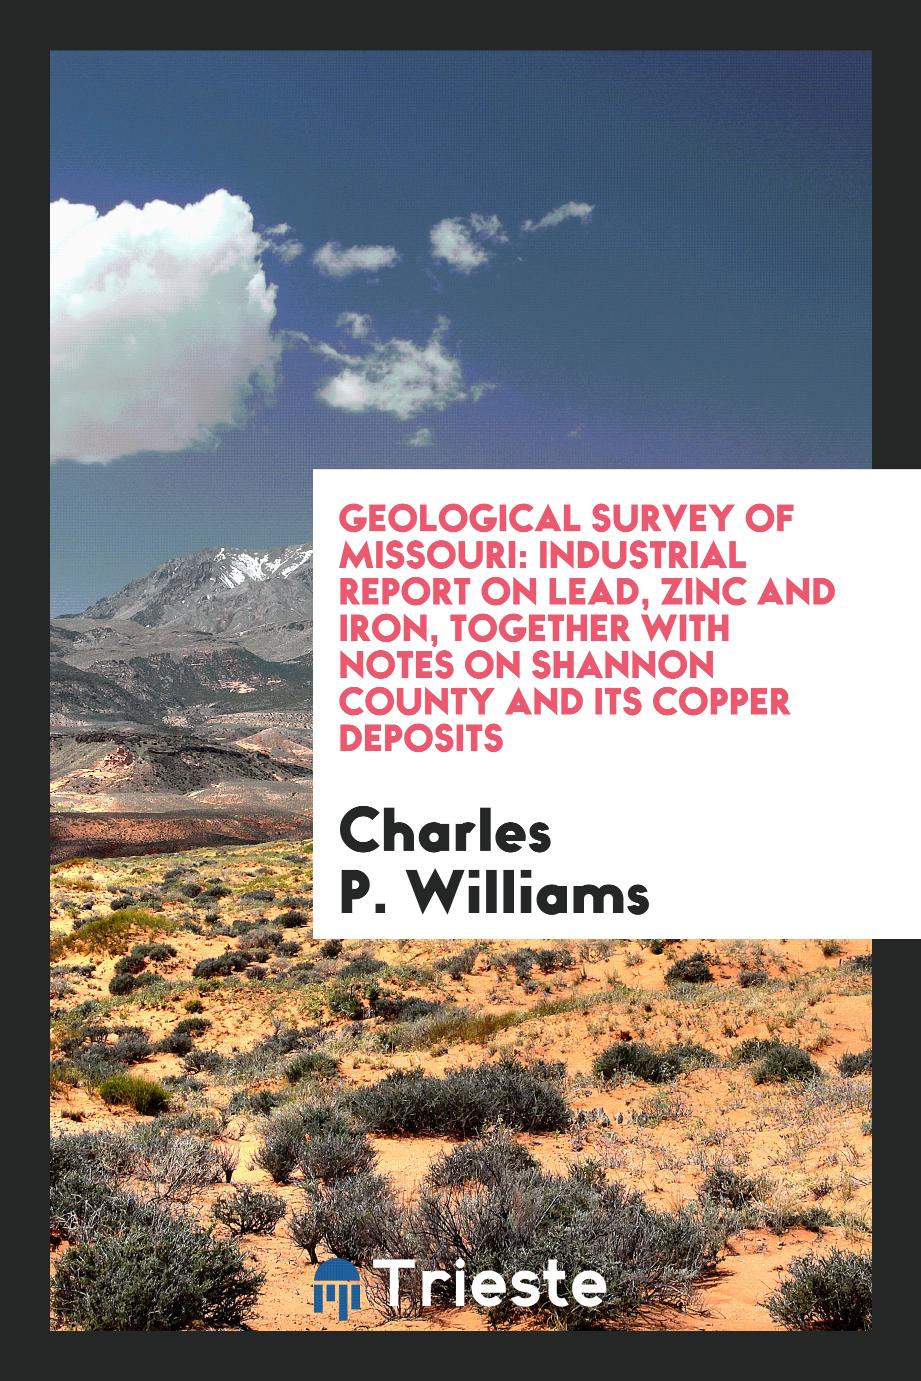 Geological Survey of Missouri: Industrial Report on Lead, Zinc and Iron, Together with Notes on Shannon County and Its Copper Deposits